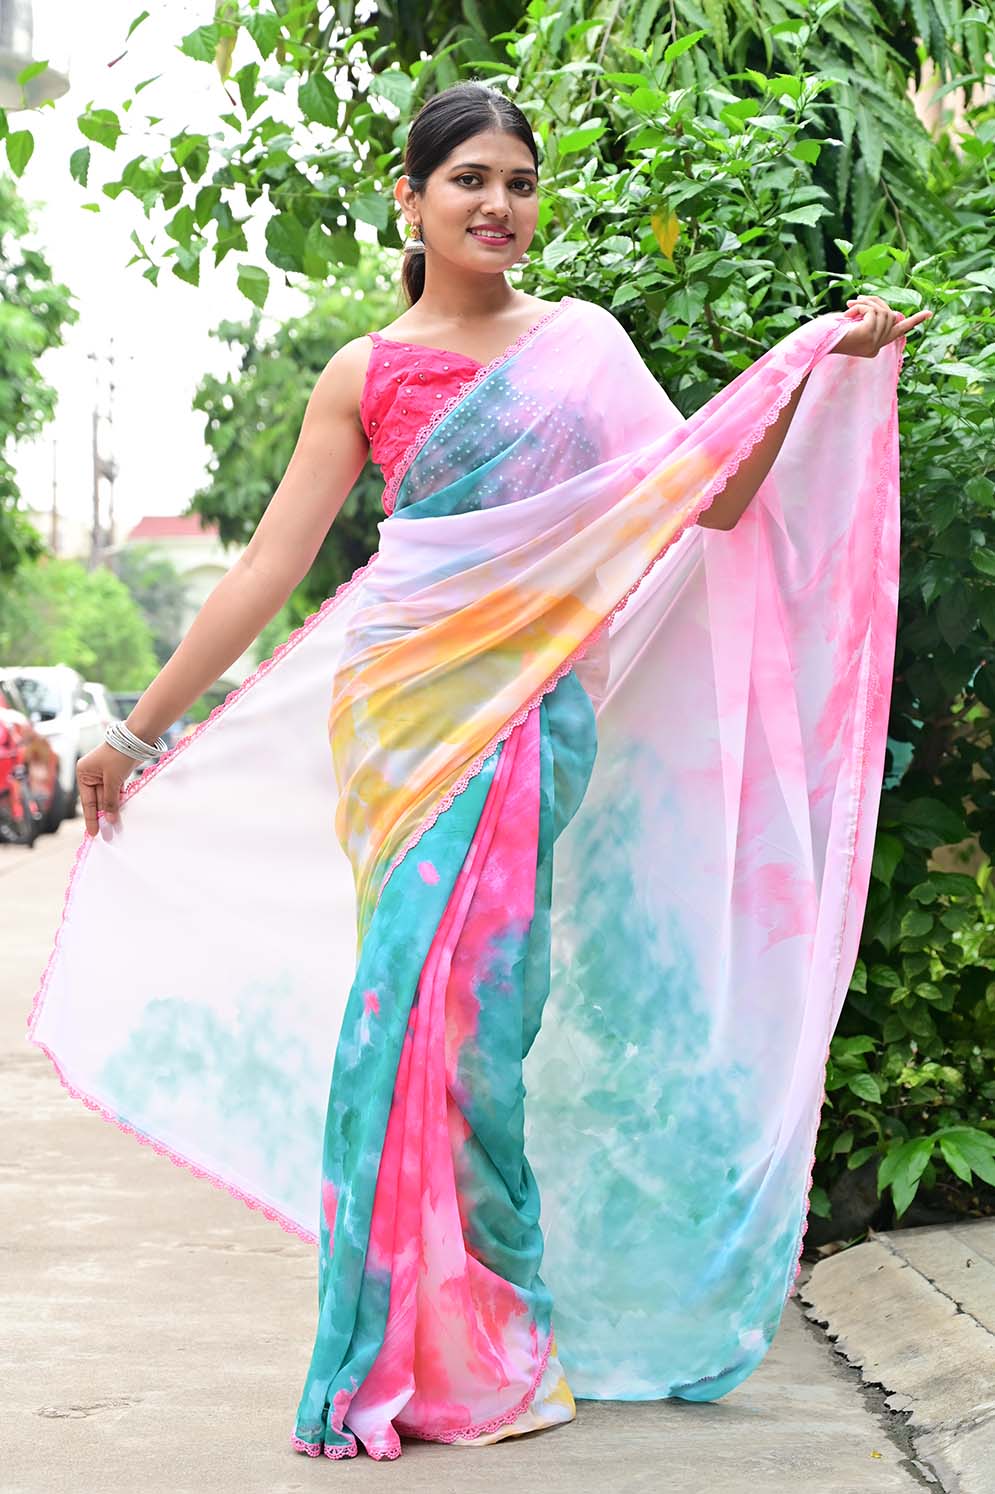 Ready To Wear Alia Bhatt Inspired Rocky Rani Multi Color With Lace Wrap in 1 minute saree - Isadora Life